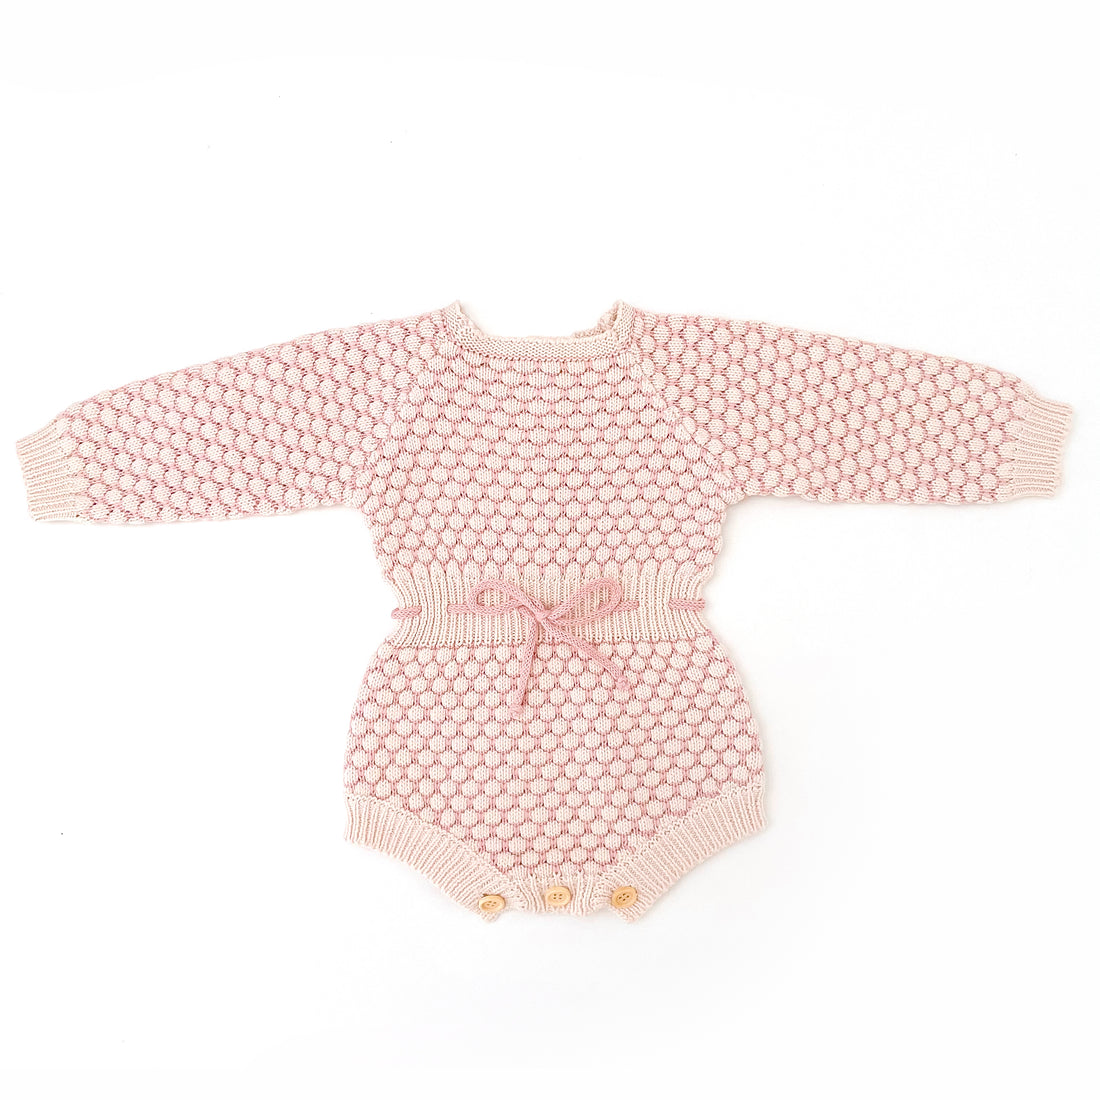 Honeycomb Long Sleeve Knitted Romper - CREAM/DUSTY PINK